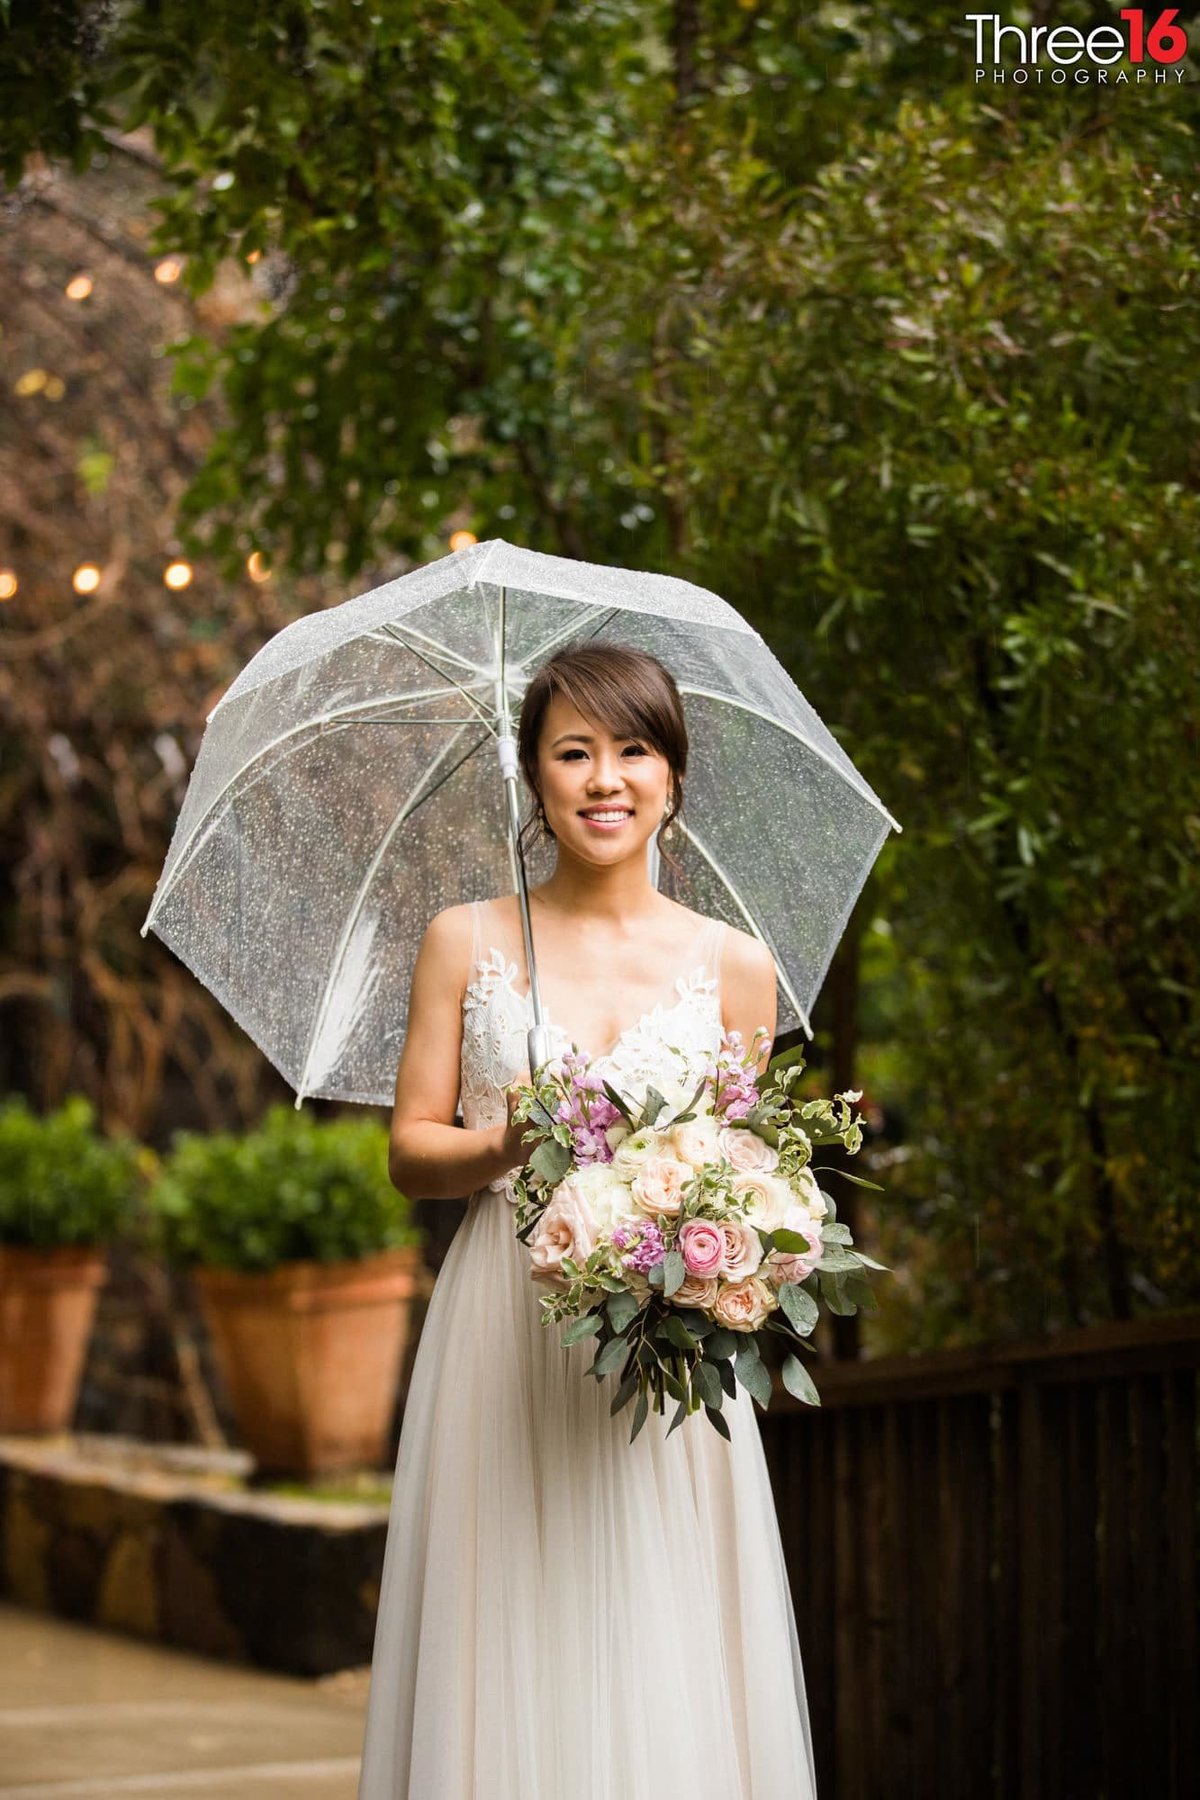 Bride posing with an umbrella and beautiful bouquet of flowers